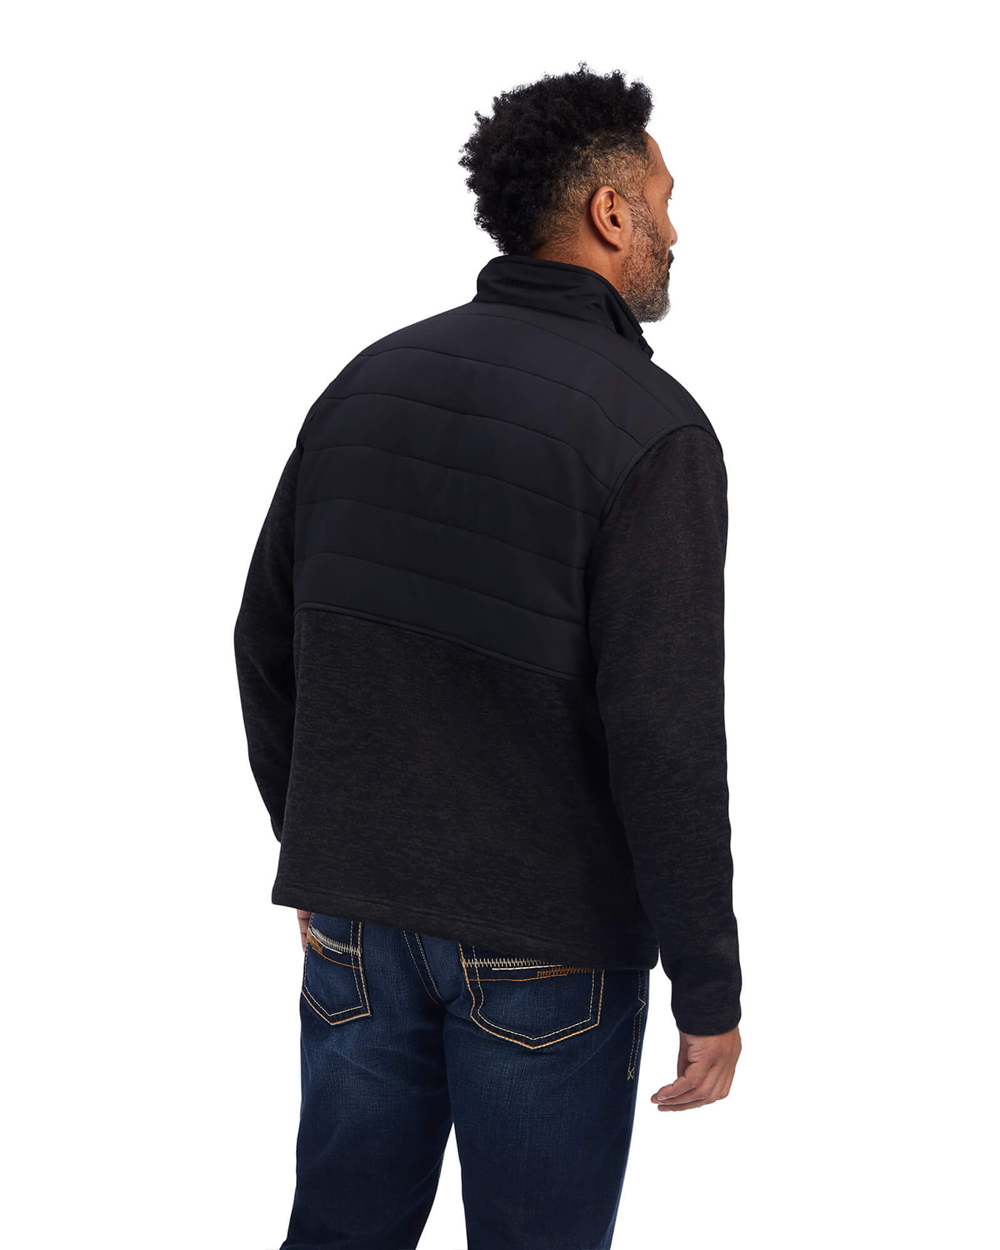 PSC - Ariat Caldwell Reinforced Snap Sweater